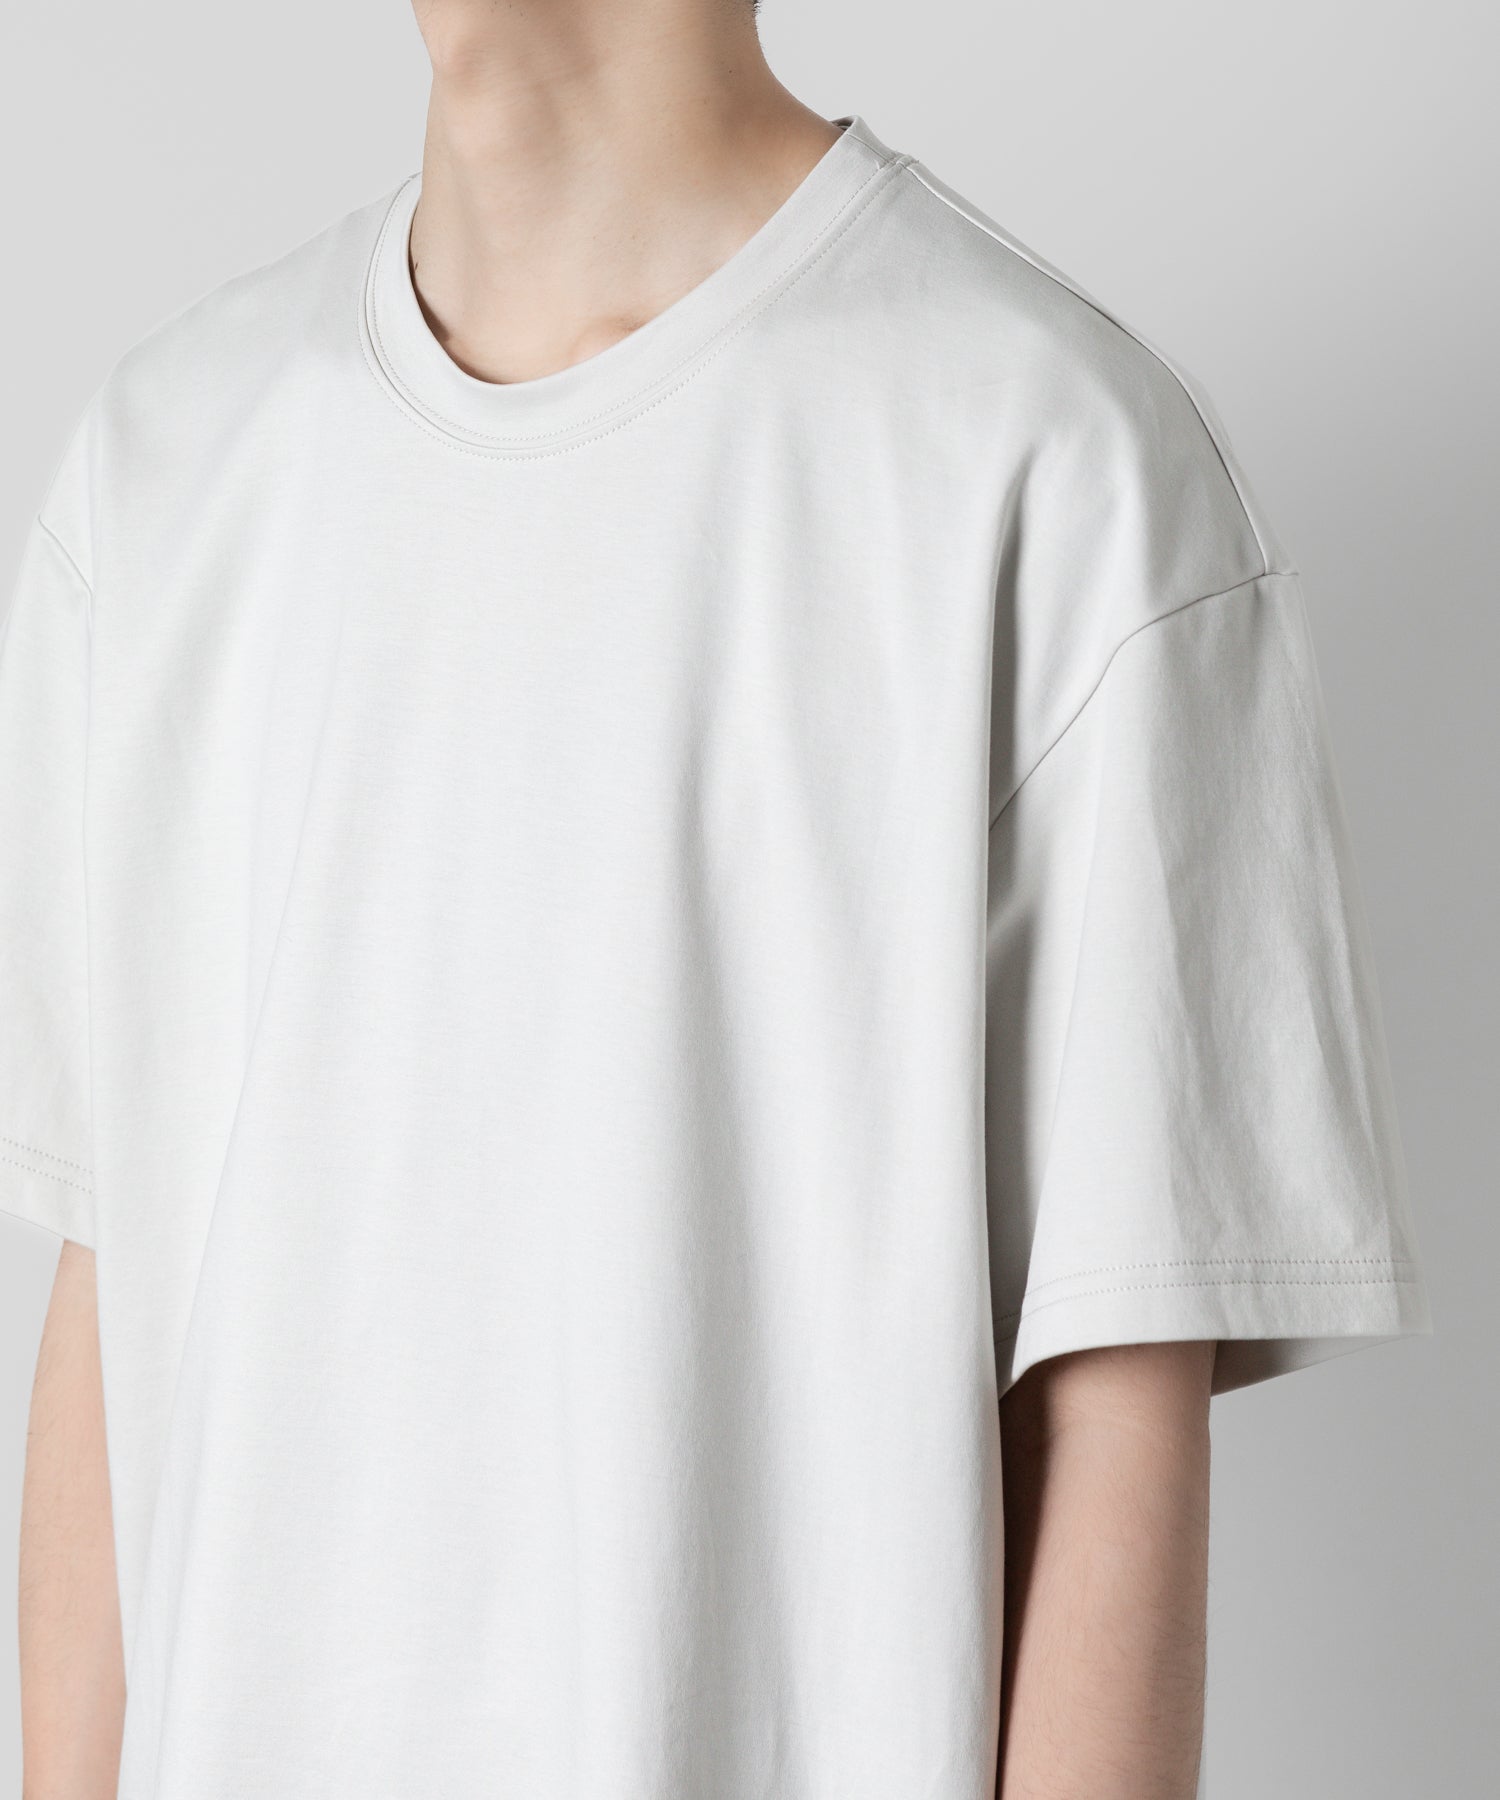 【ATTACHMENT】ATTACHMENT アタッチメントのCOTTON DOUBLE FACE OVERSIZED S/S TEE - L.GRAY 公式通販サイトsession福岡セレクトショップ